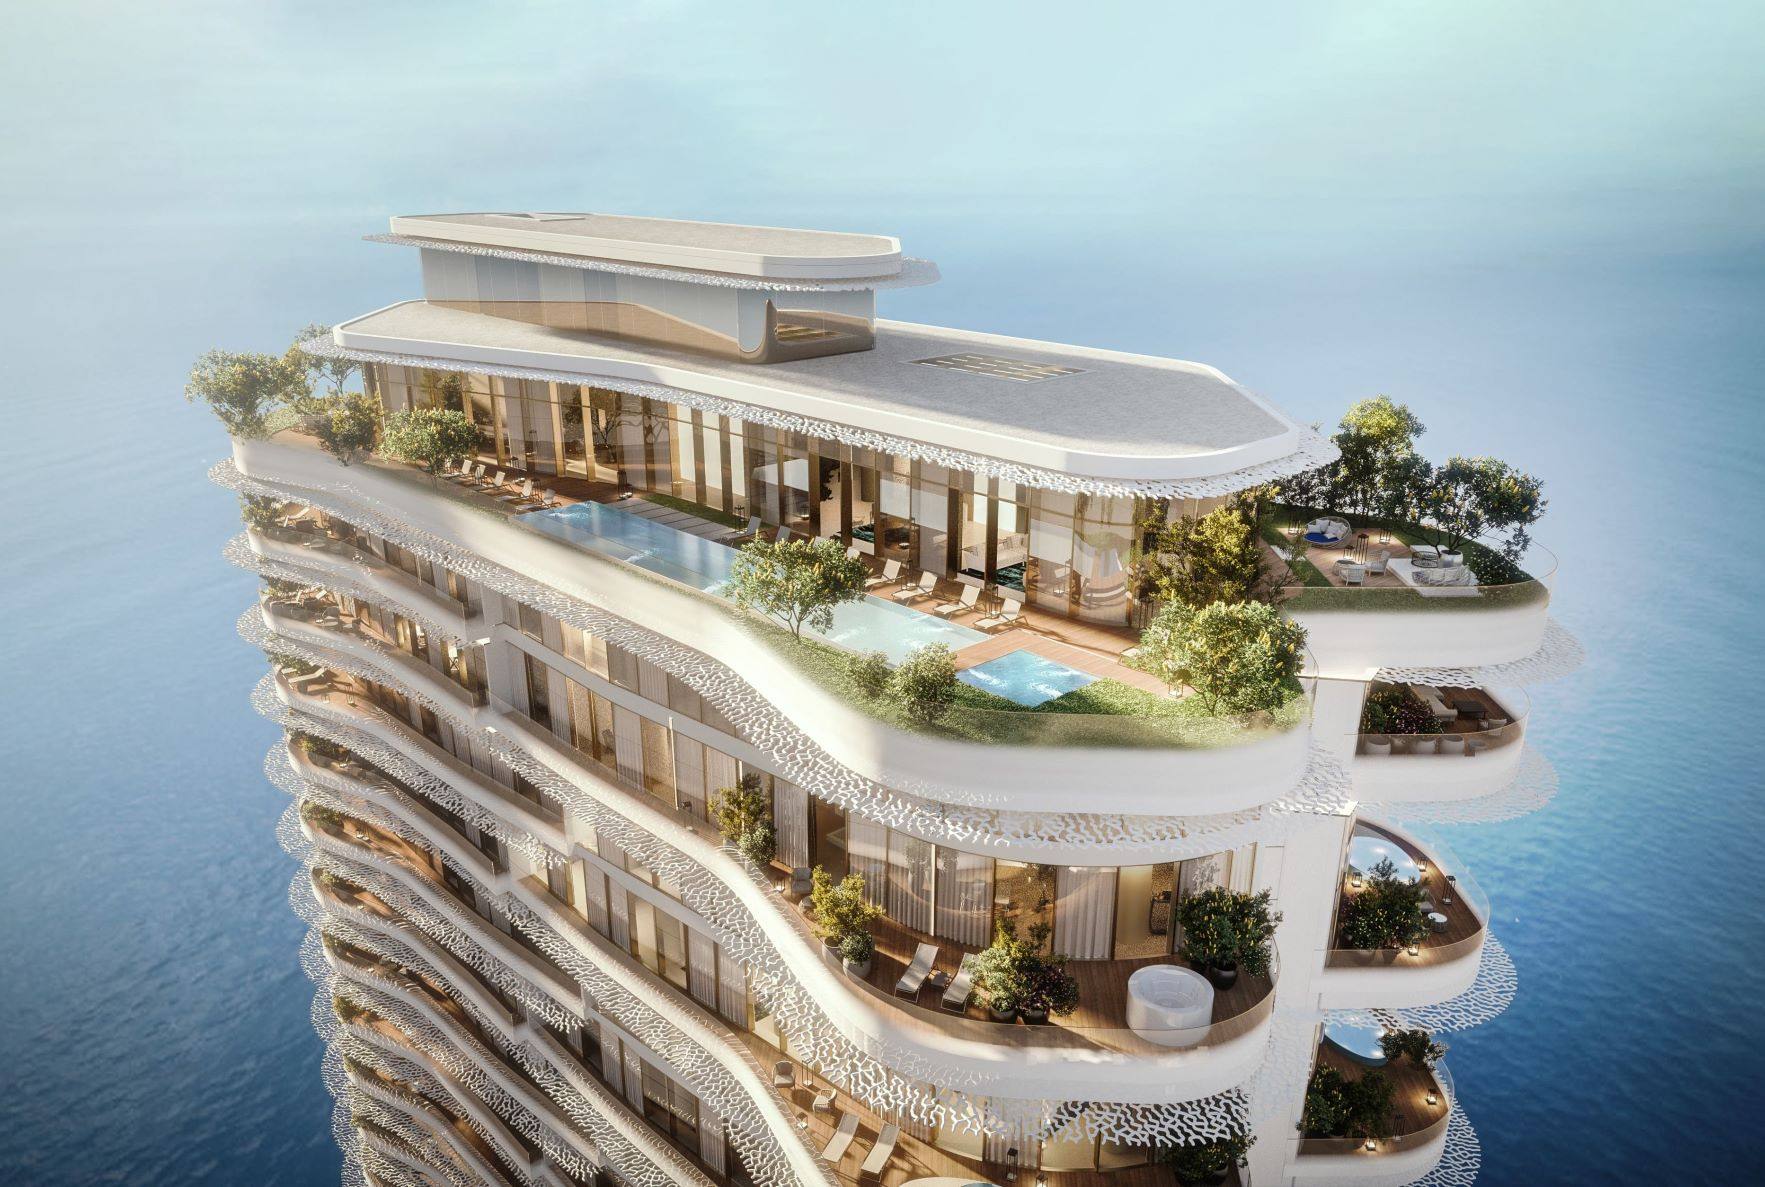 The Bulgari Lighthouse in Dubai set a record with a multimillion-dollar apartment sale – but it’s already been broken by yet another branded residence. Photo: Handout